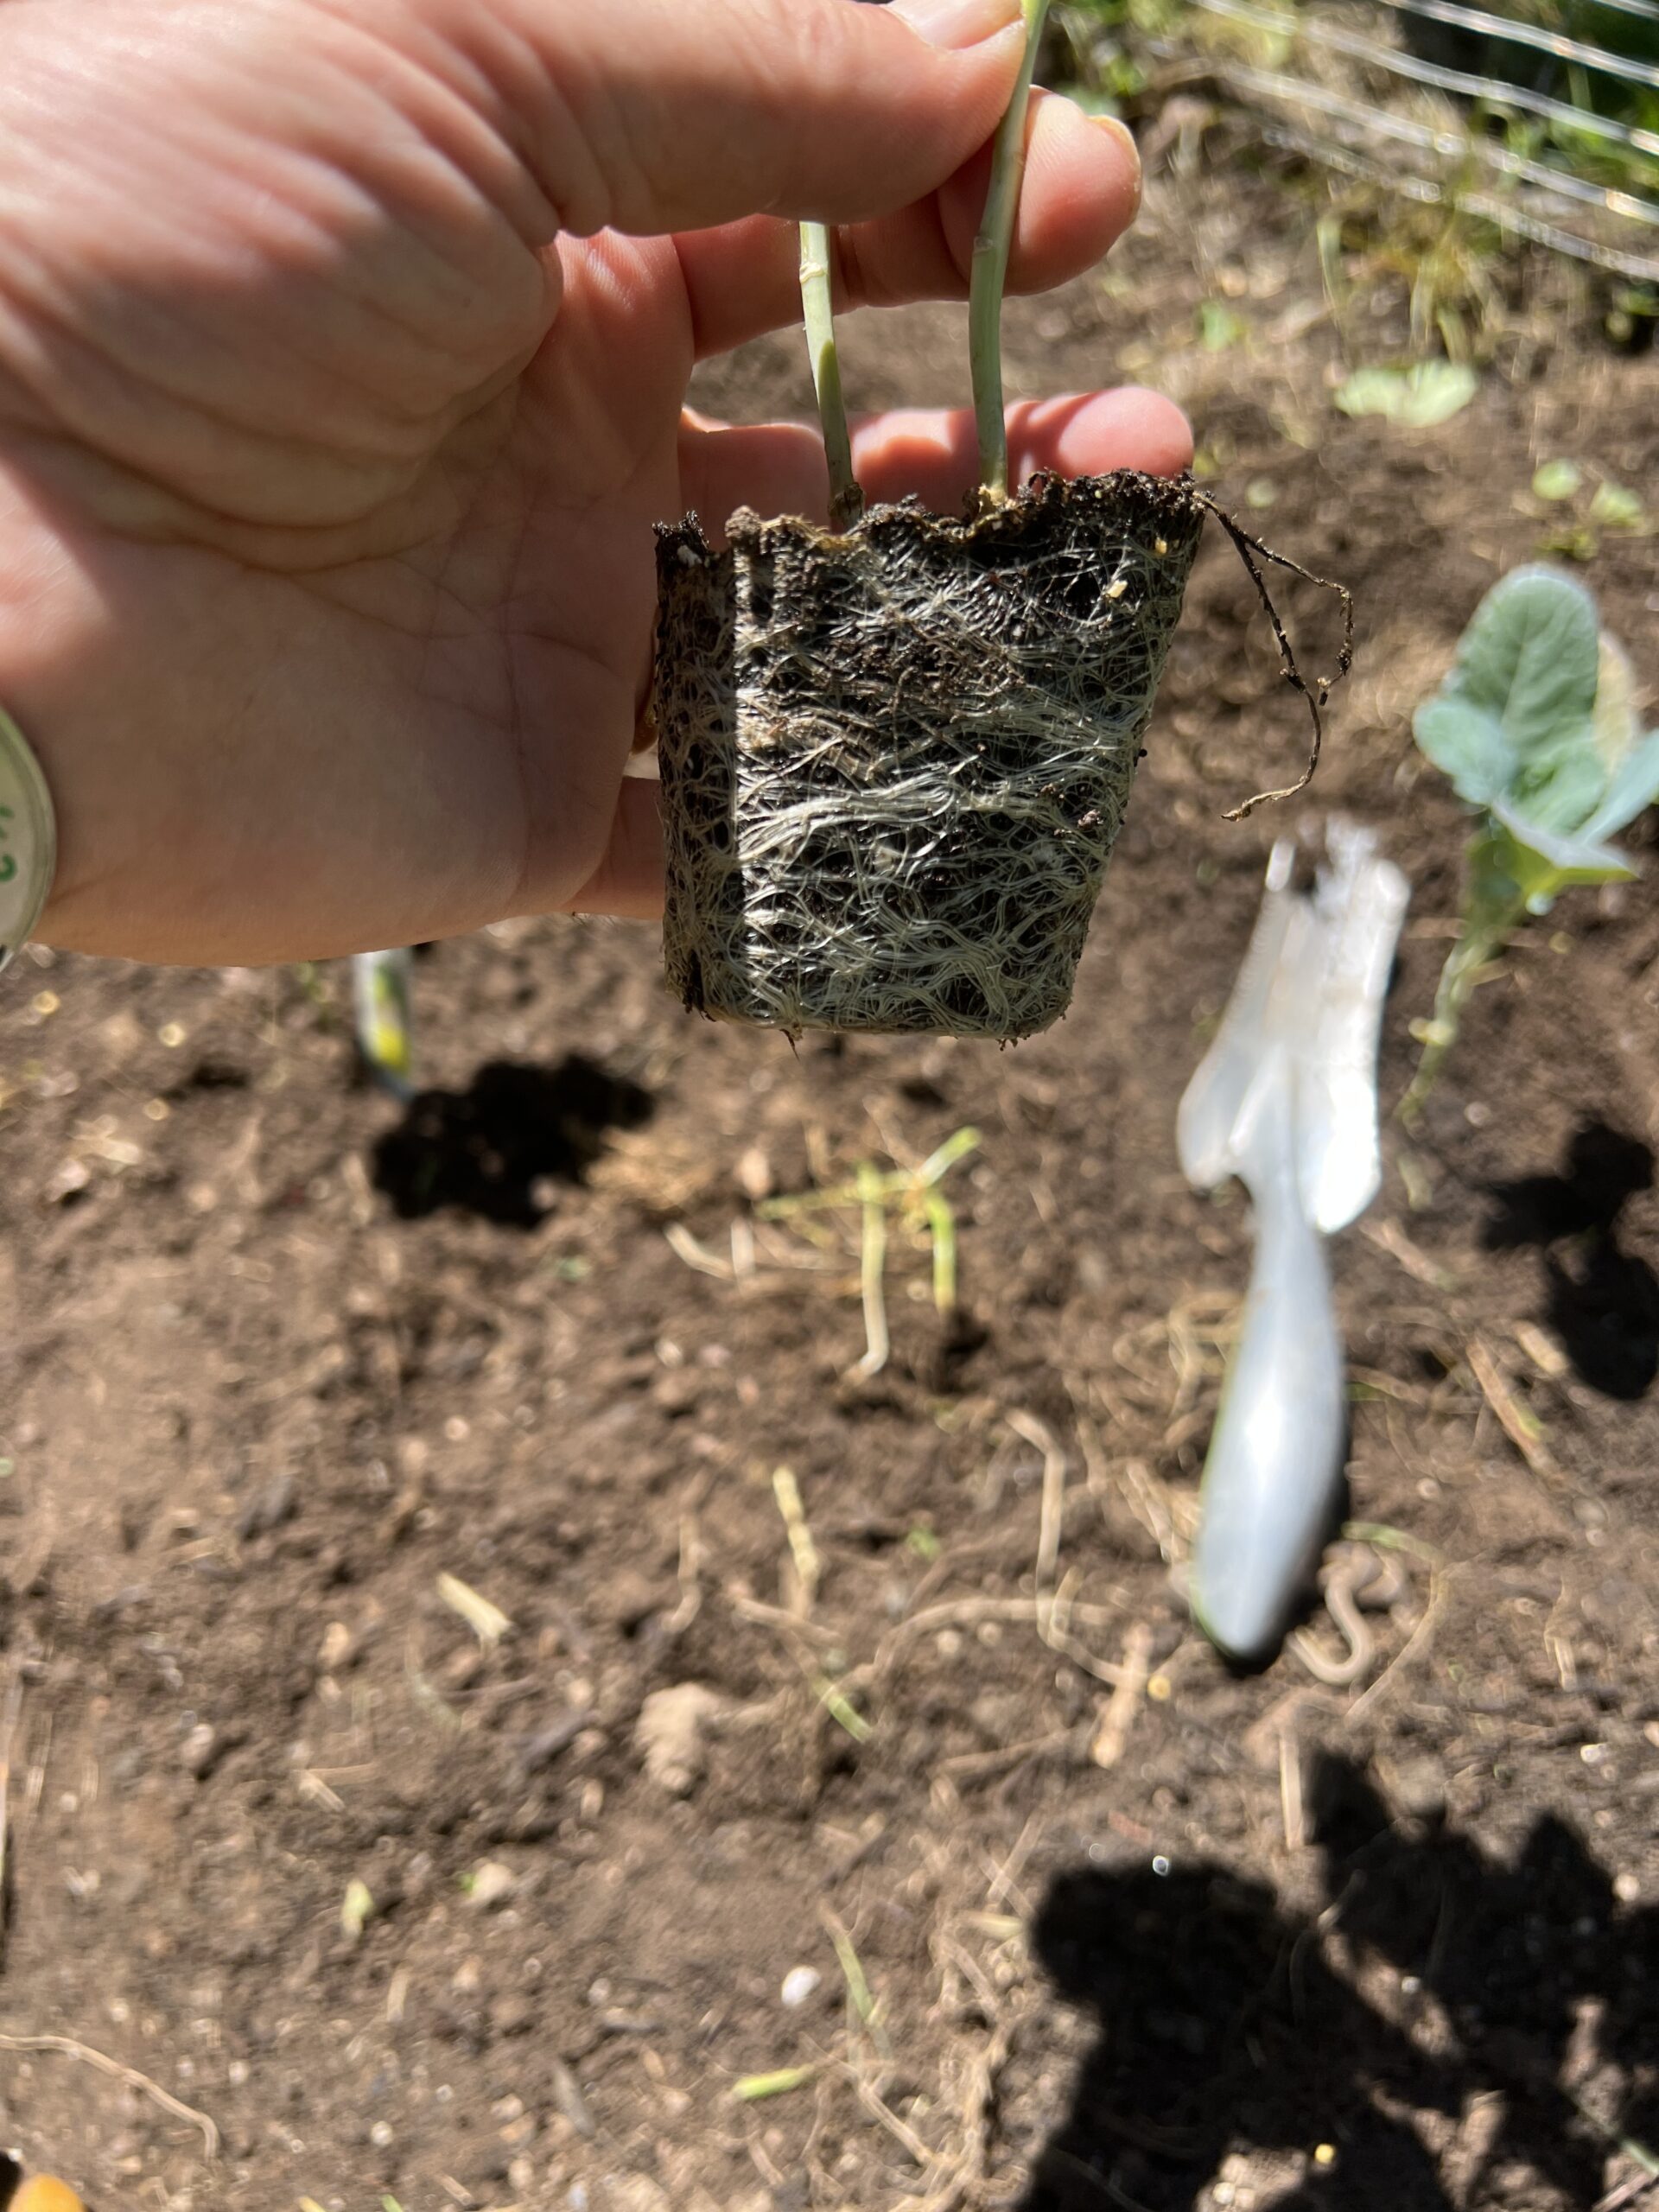 Broccoli transplants from a cell pack. The roots need to be gently pulled apart or sliced vertically or teased apart before planting. This encourages new root growth, which is essential for allowing the plants to grow and thrive.
ANDREW MESSINGER